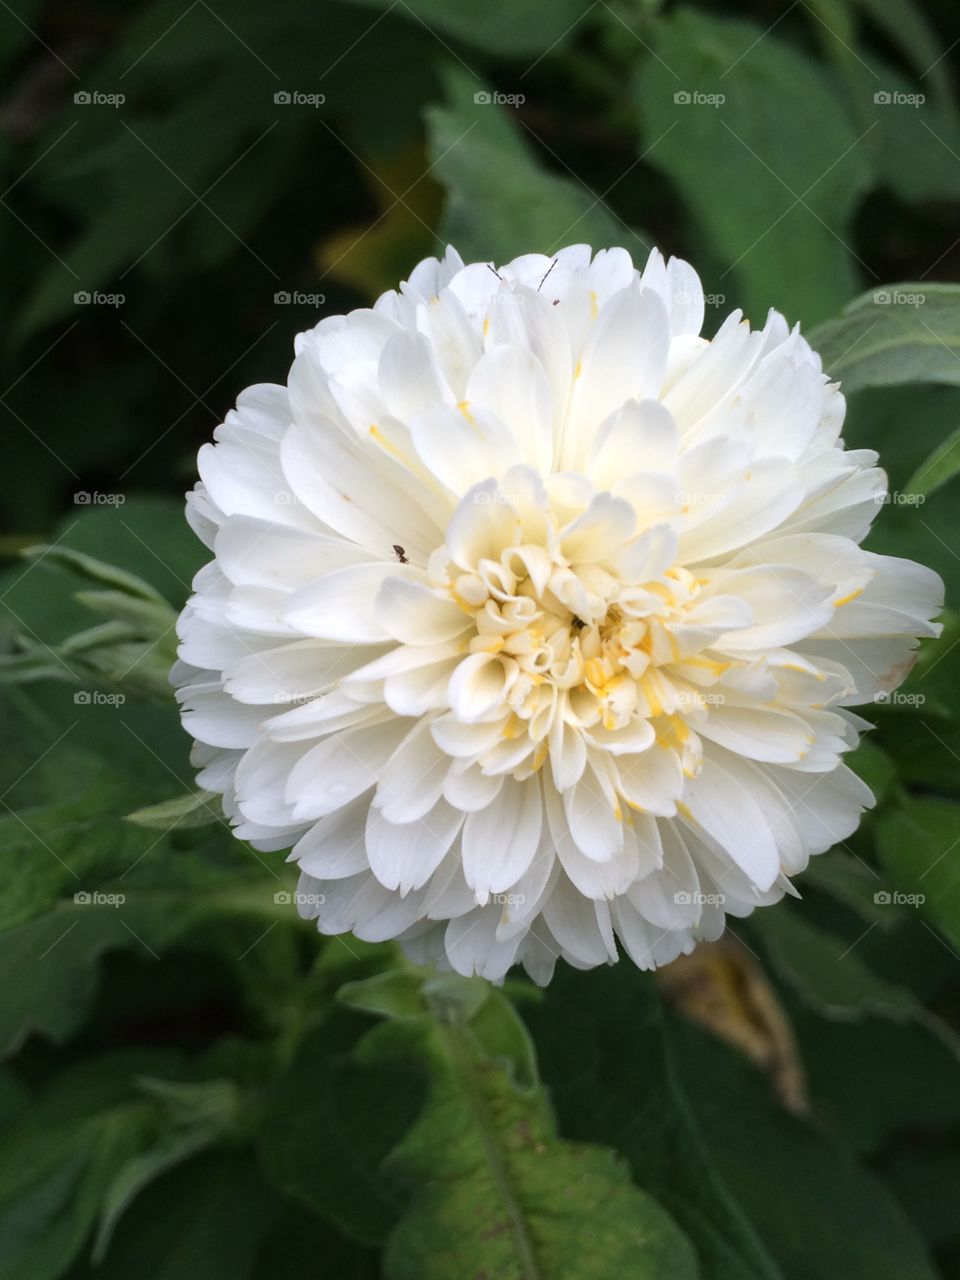 Layers of white petals 